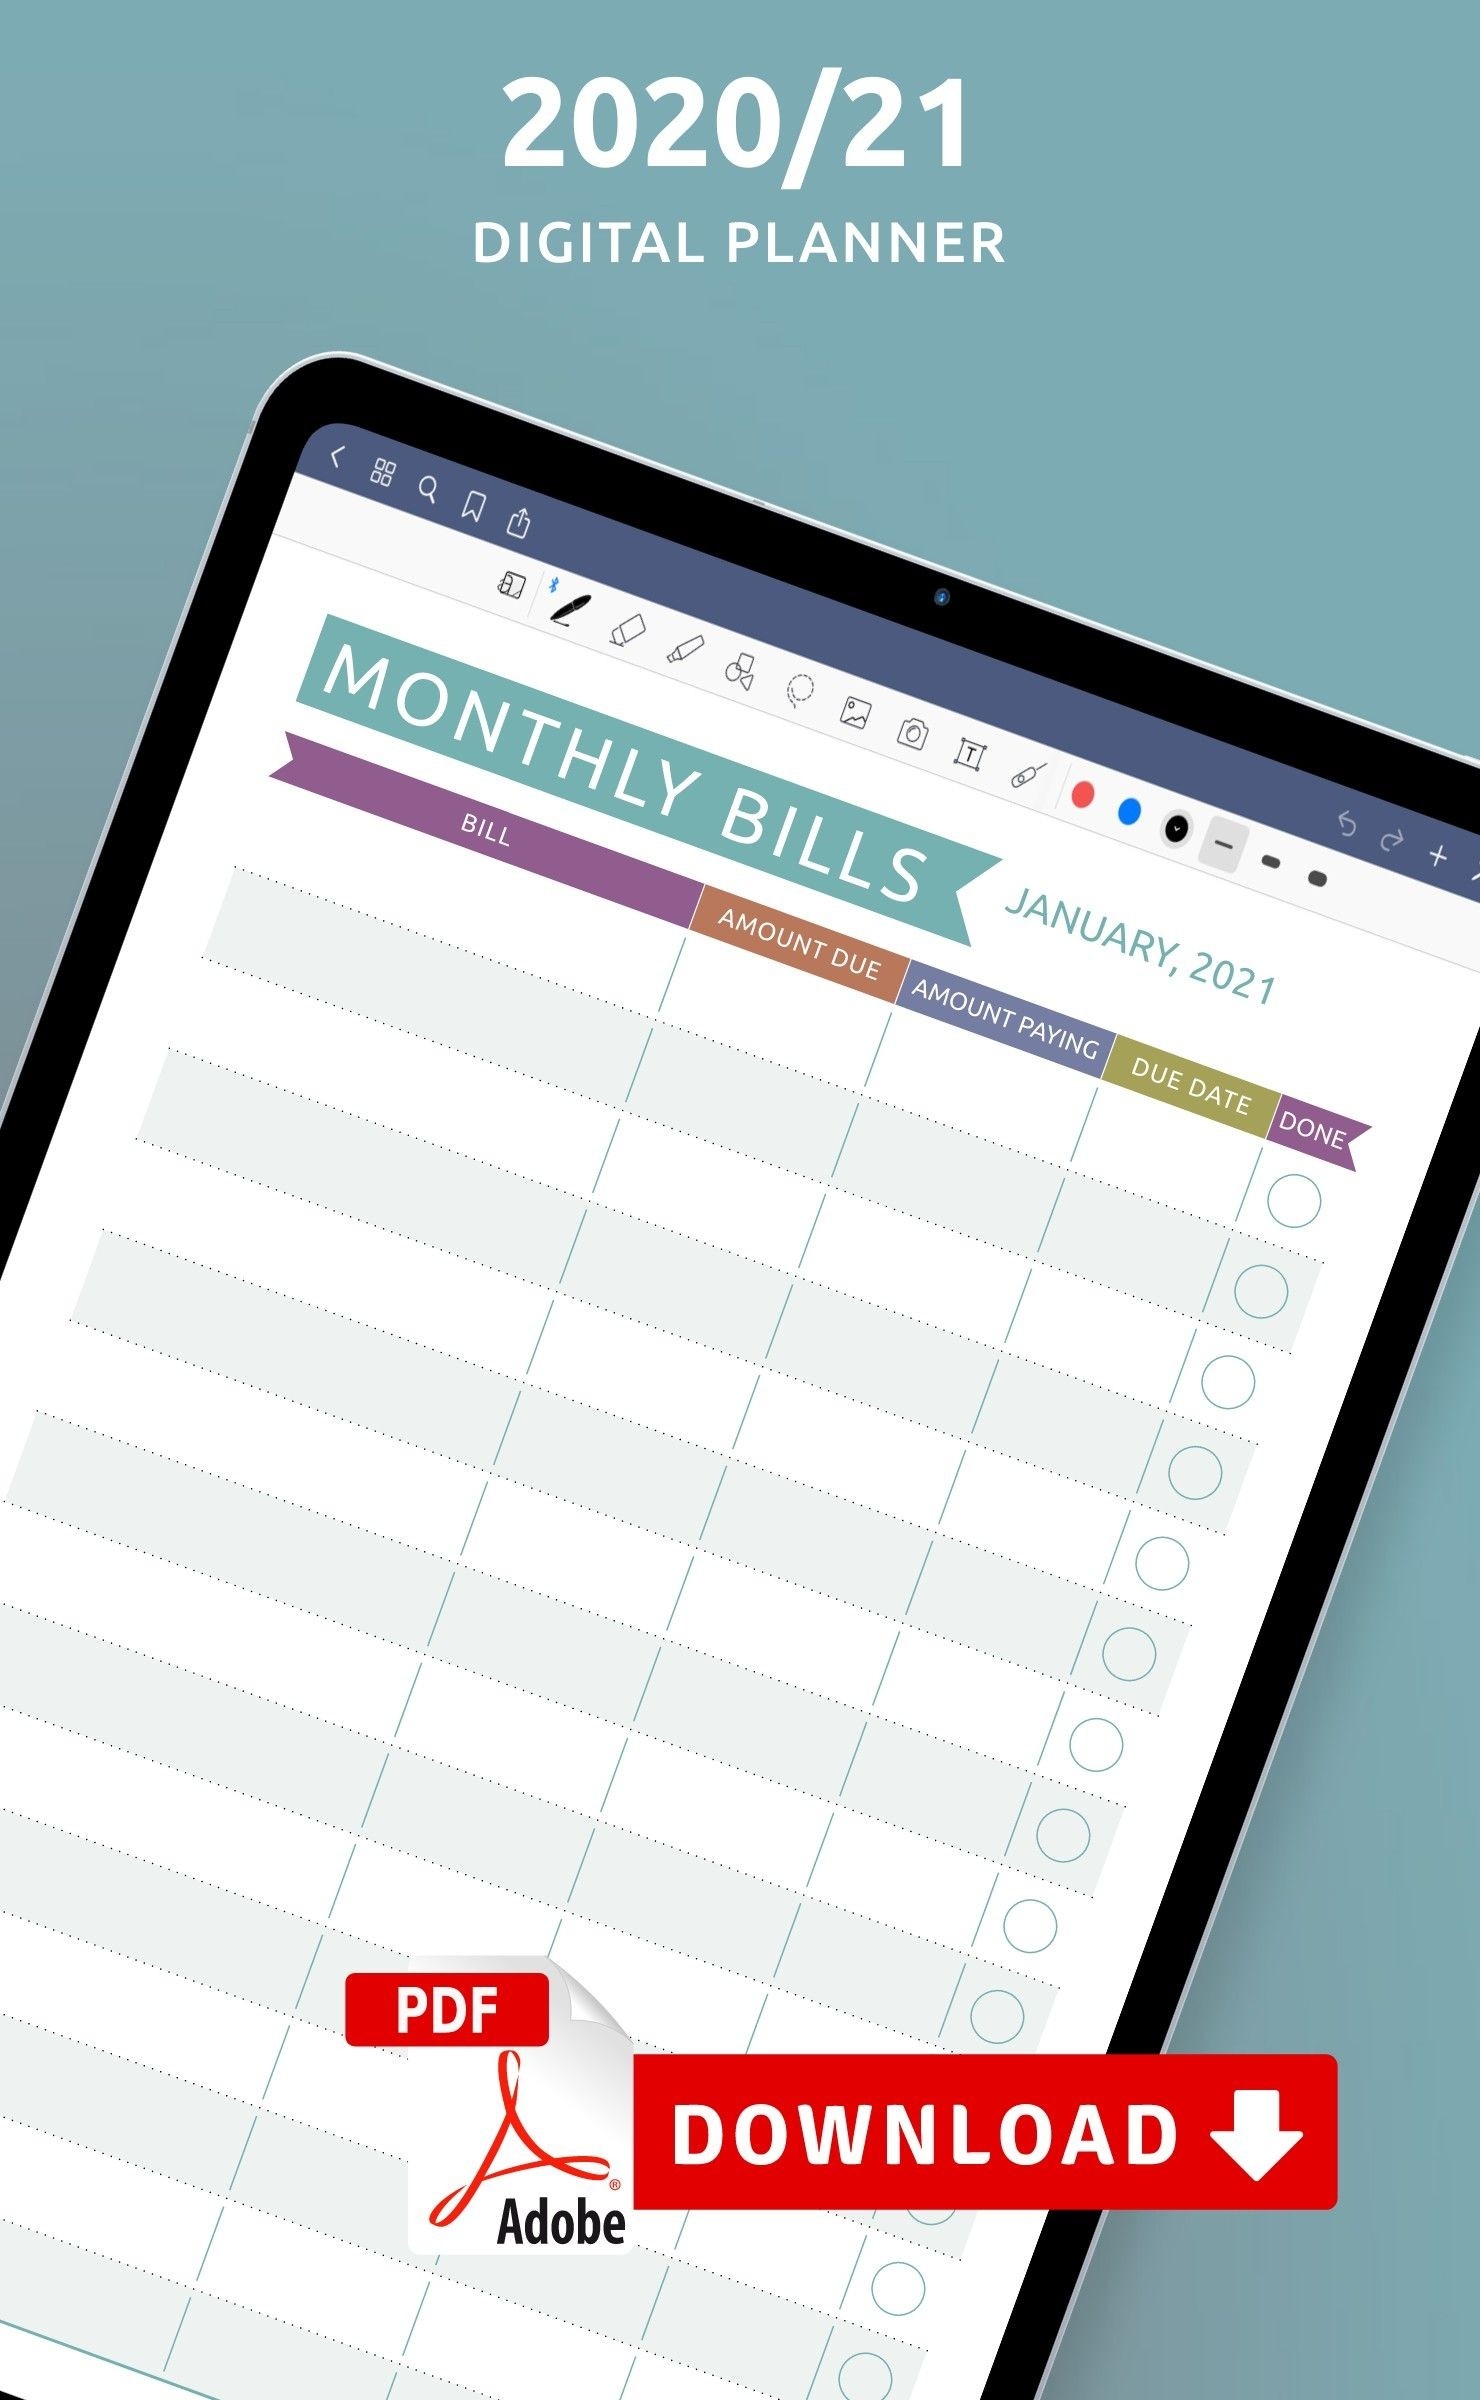 Monthly Budget Printable Template, Personal Budget Planner-2021 Monthlyi Bills